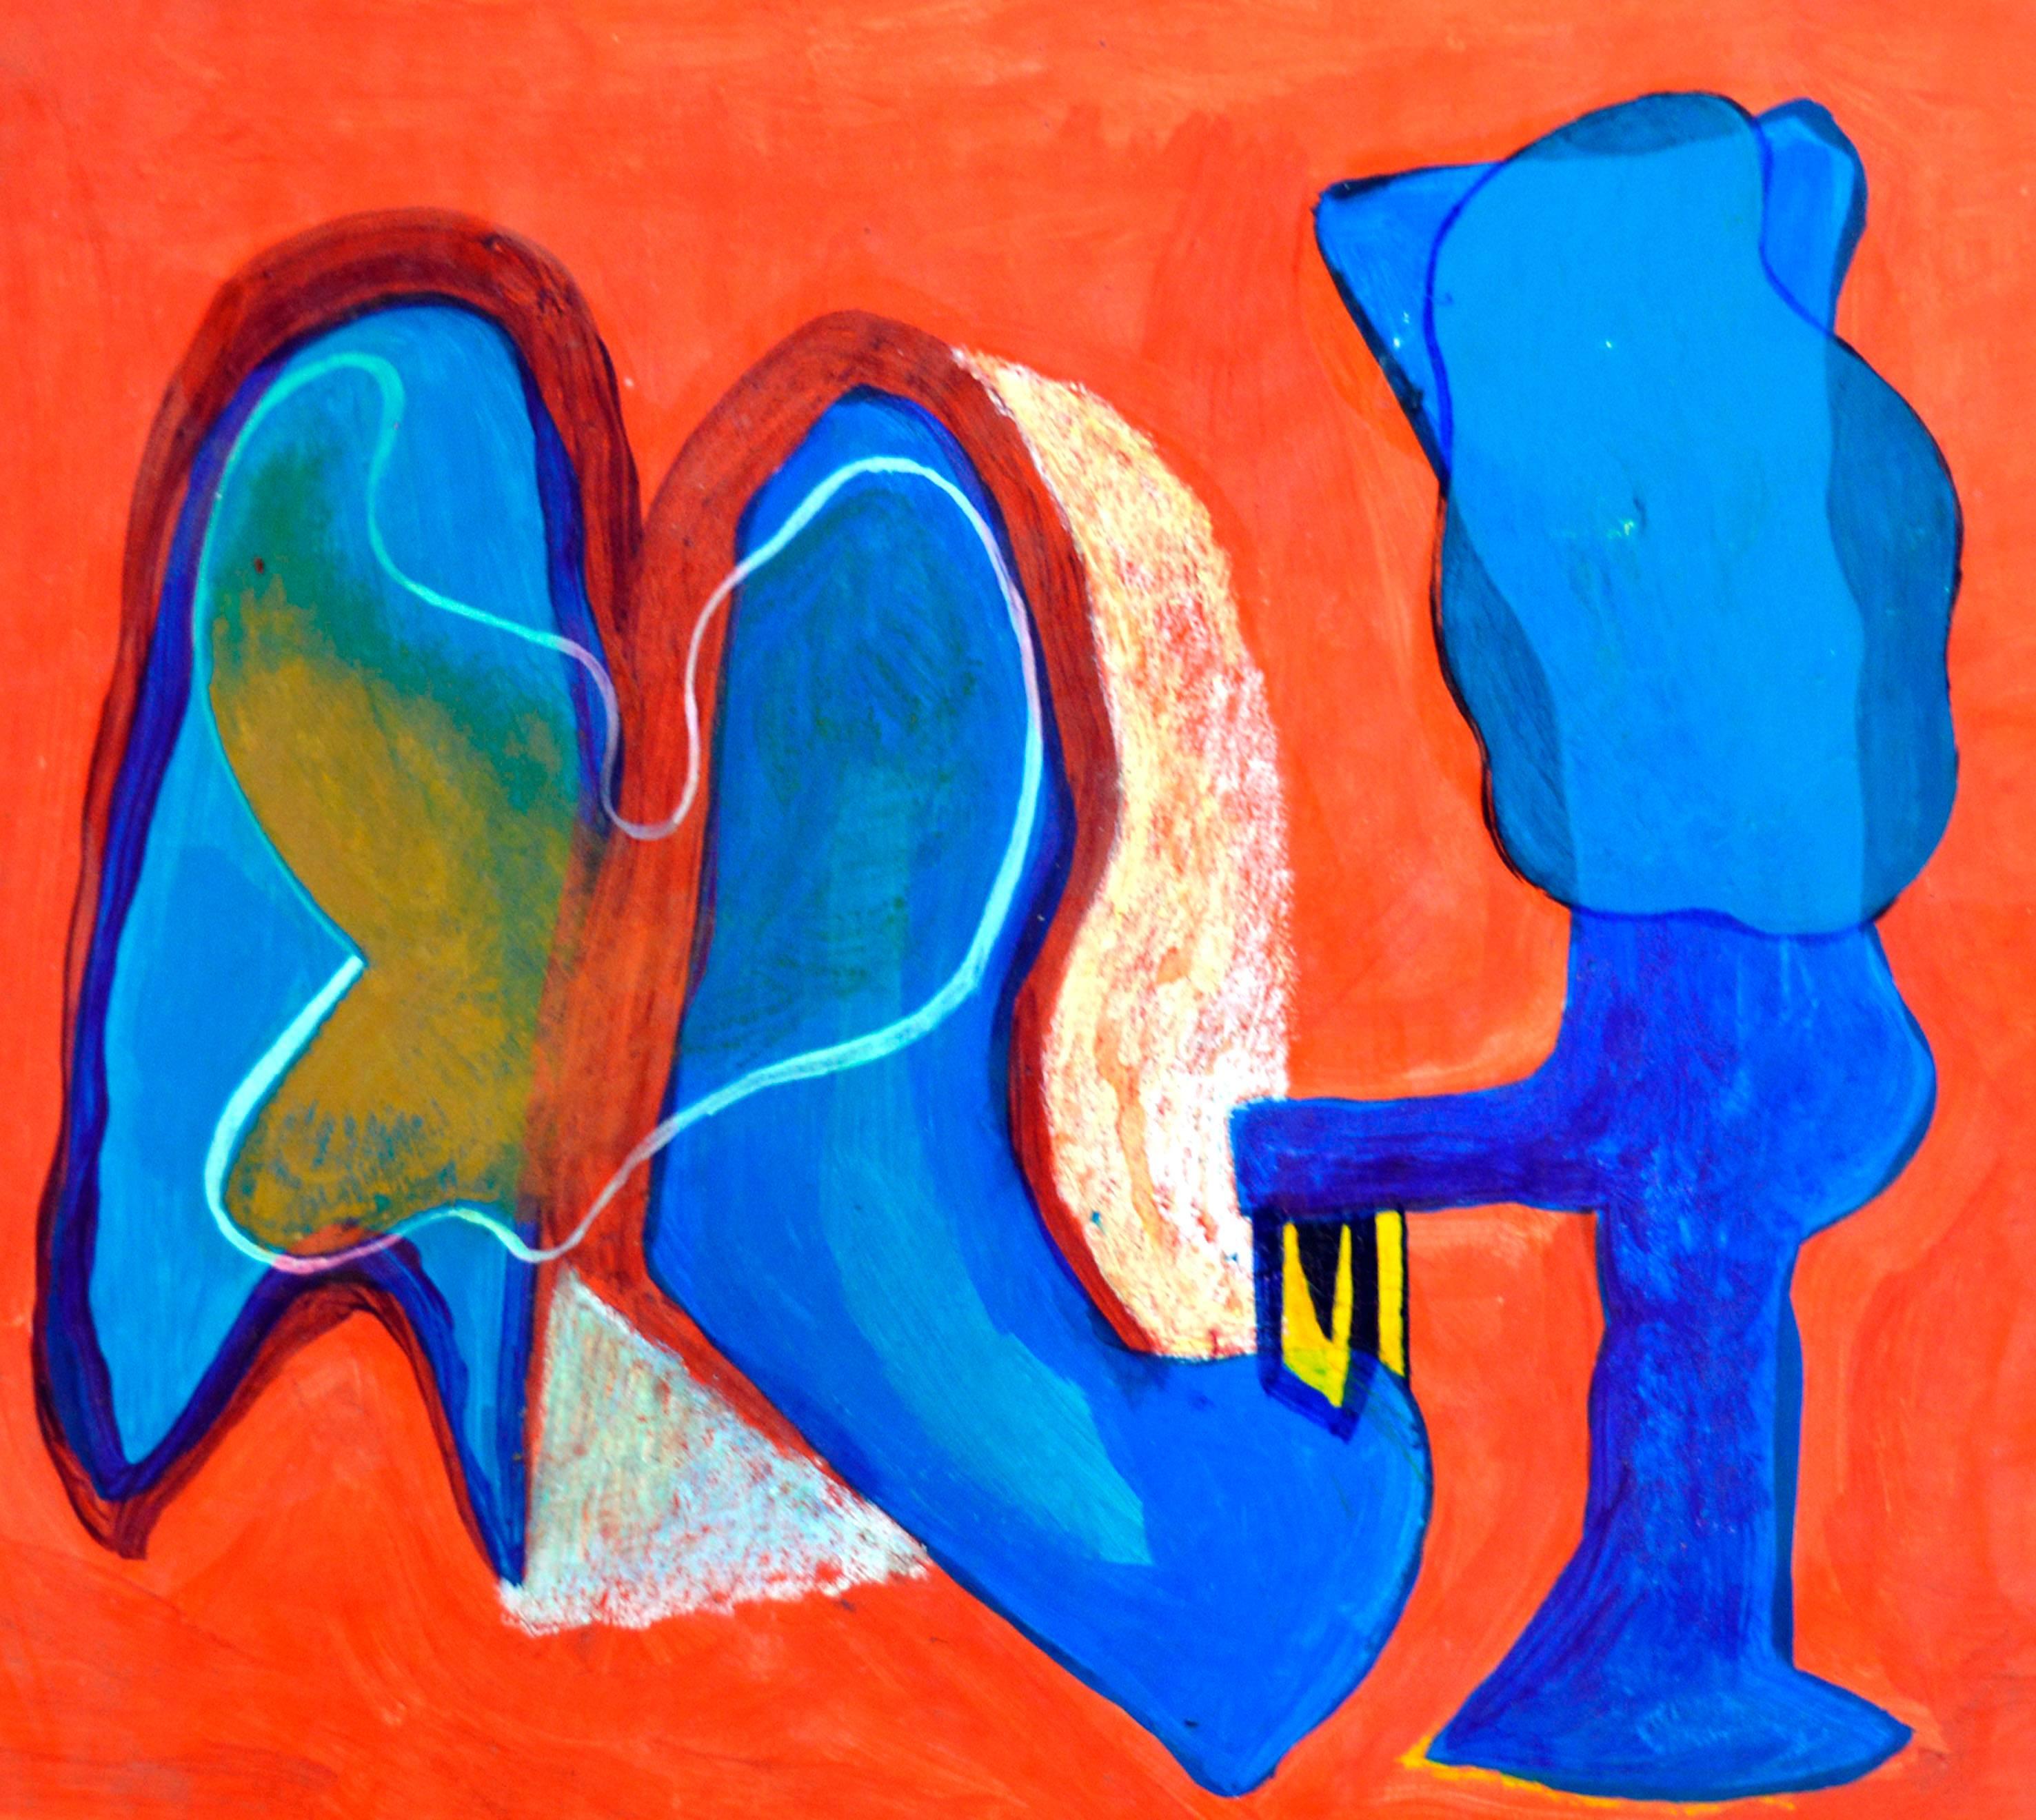 Orange Abstract Boot Maker - Abstract Expressionist Painting by Michael William Eggleston